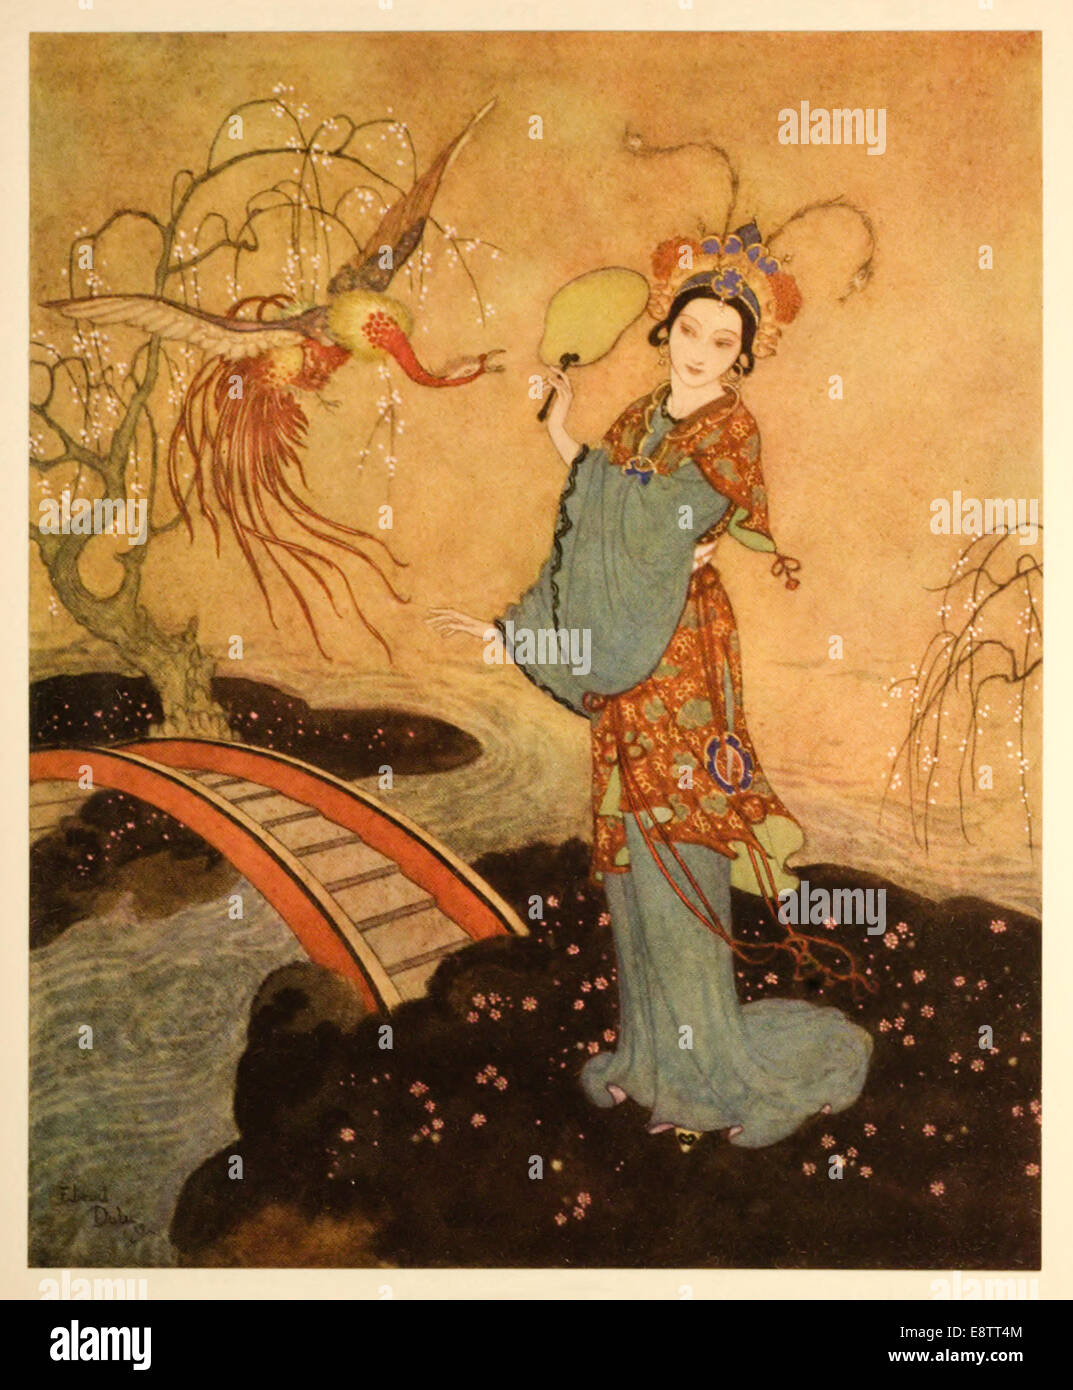 Princess Badoura - Edmund Dulac illustration from ‘Stories from the Arabian nights’. See description for more information Stock Photo